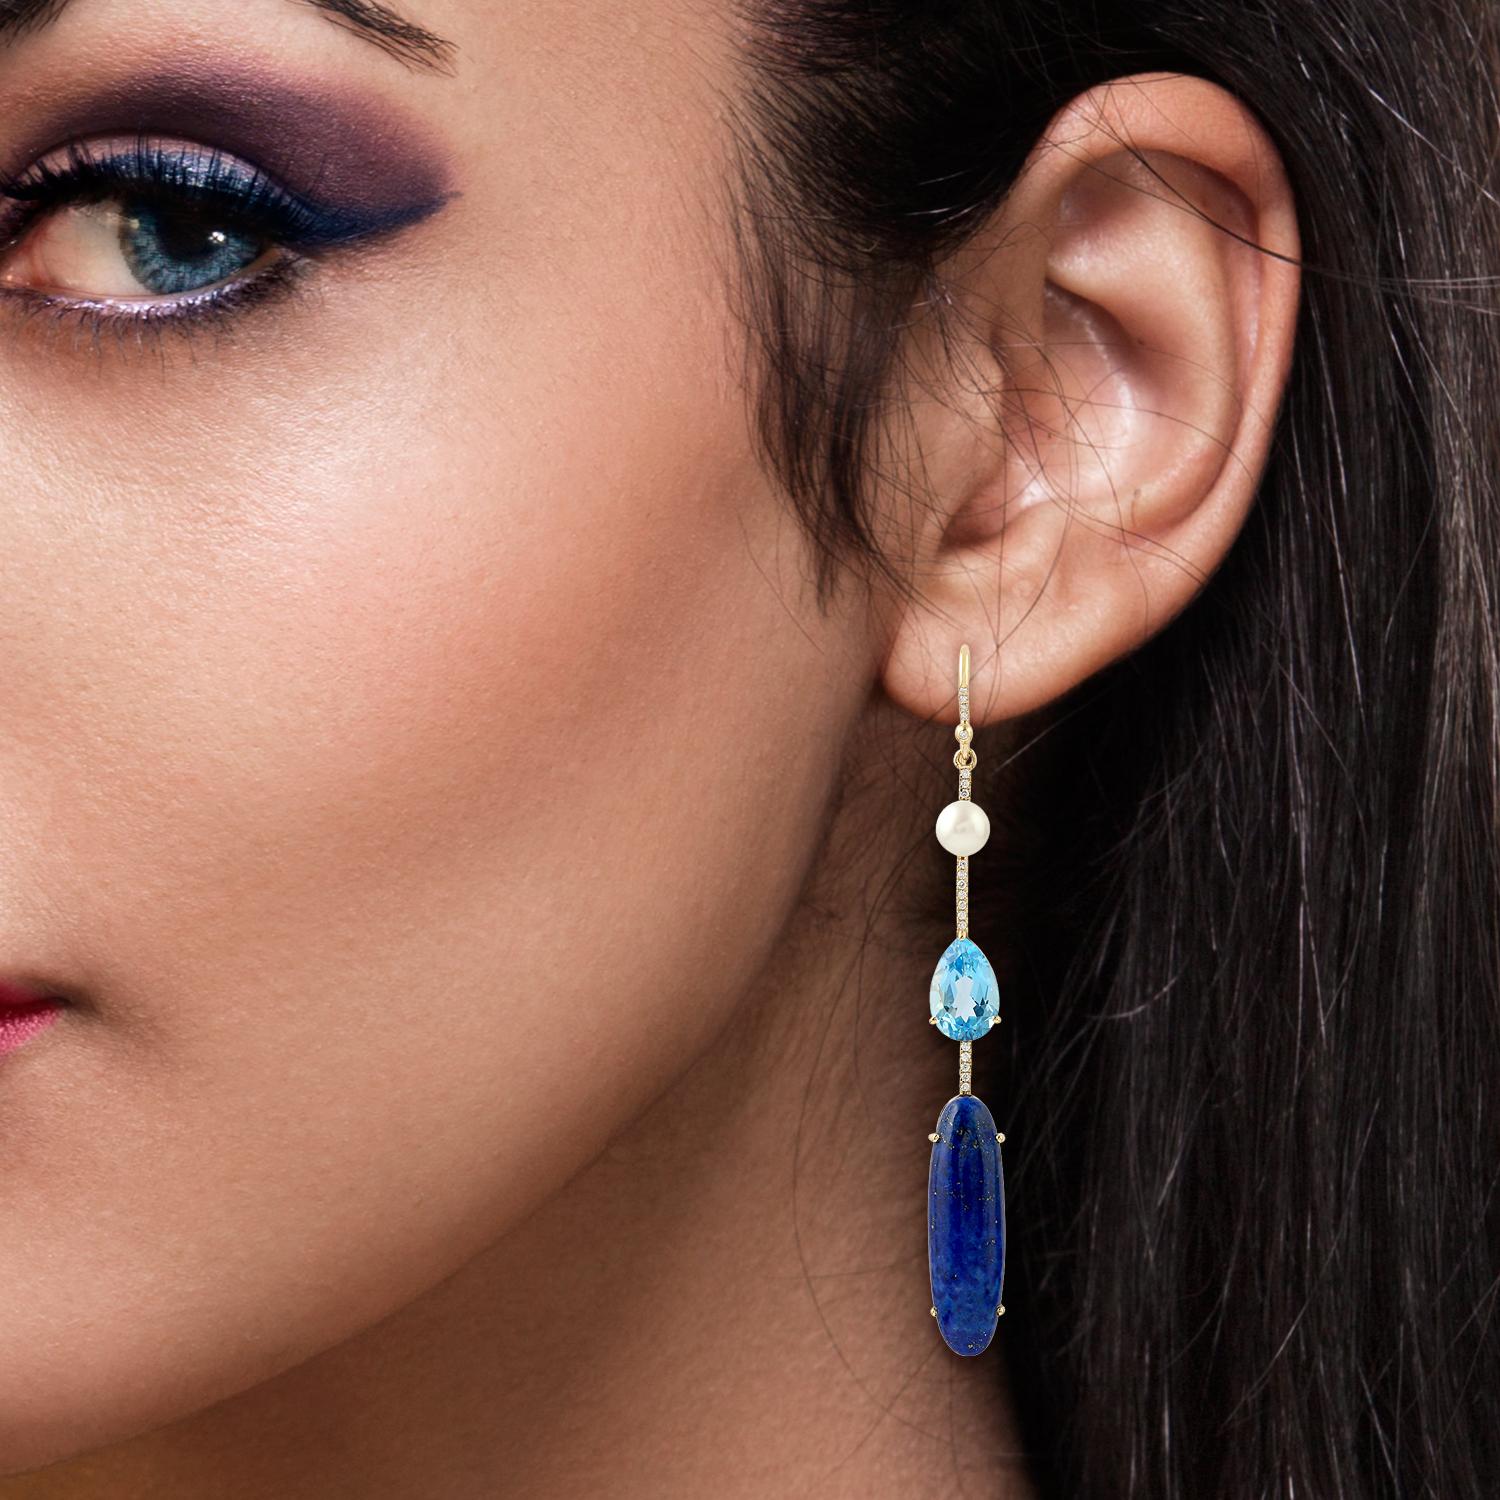 These beautiful linear drop earring are handcrafted in 18-karat gold. It is set with 12.45 carats Lapis, 8.75 carats turquoise, 5.08 carats Kyanite and .22 carats of glimmering diamonds.

FOLLOW  MEGHNA JEWELS storefront to view the latest